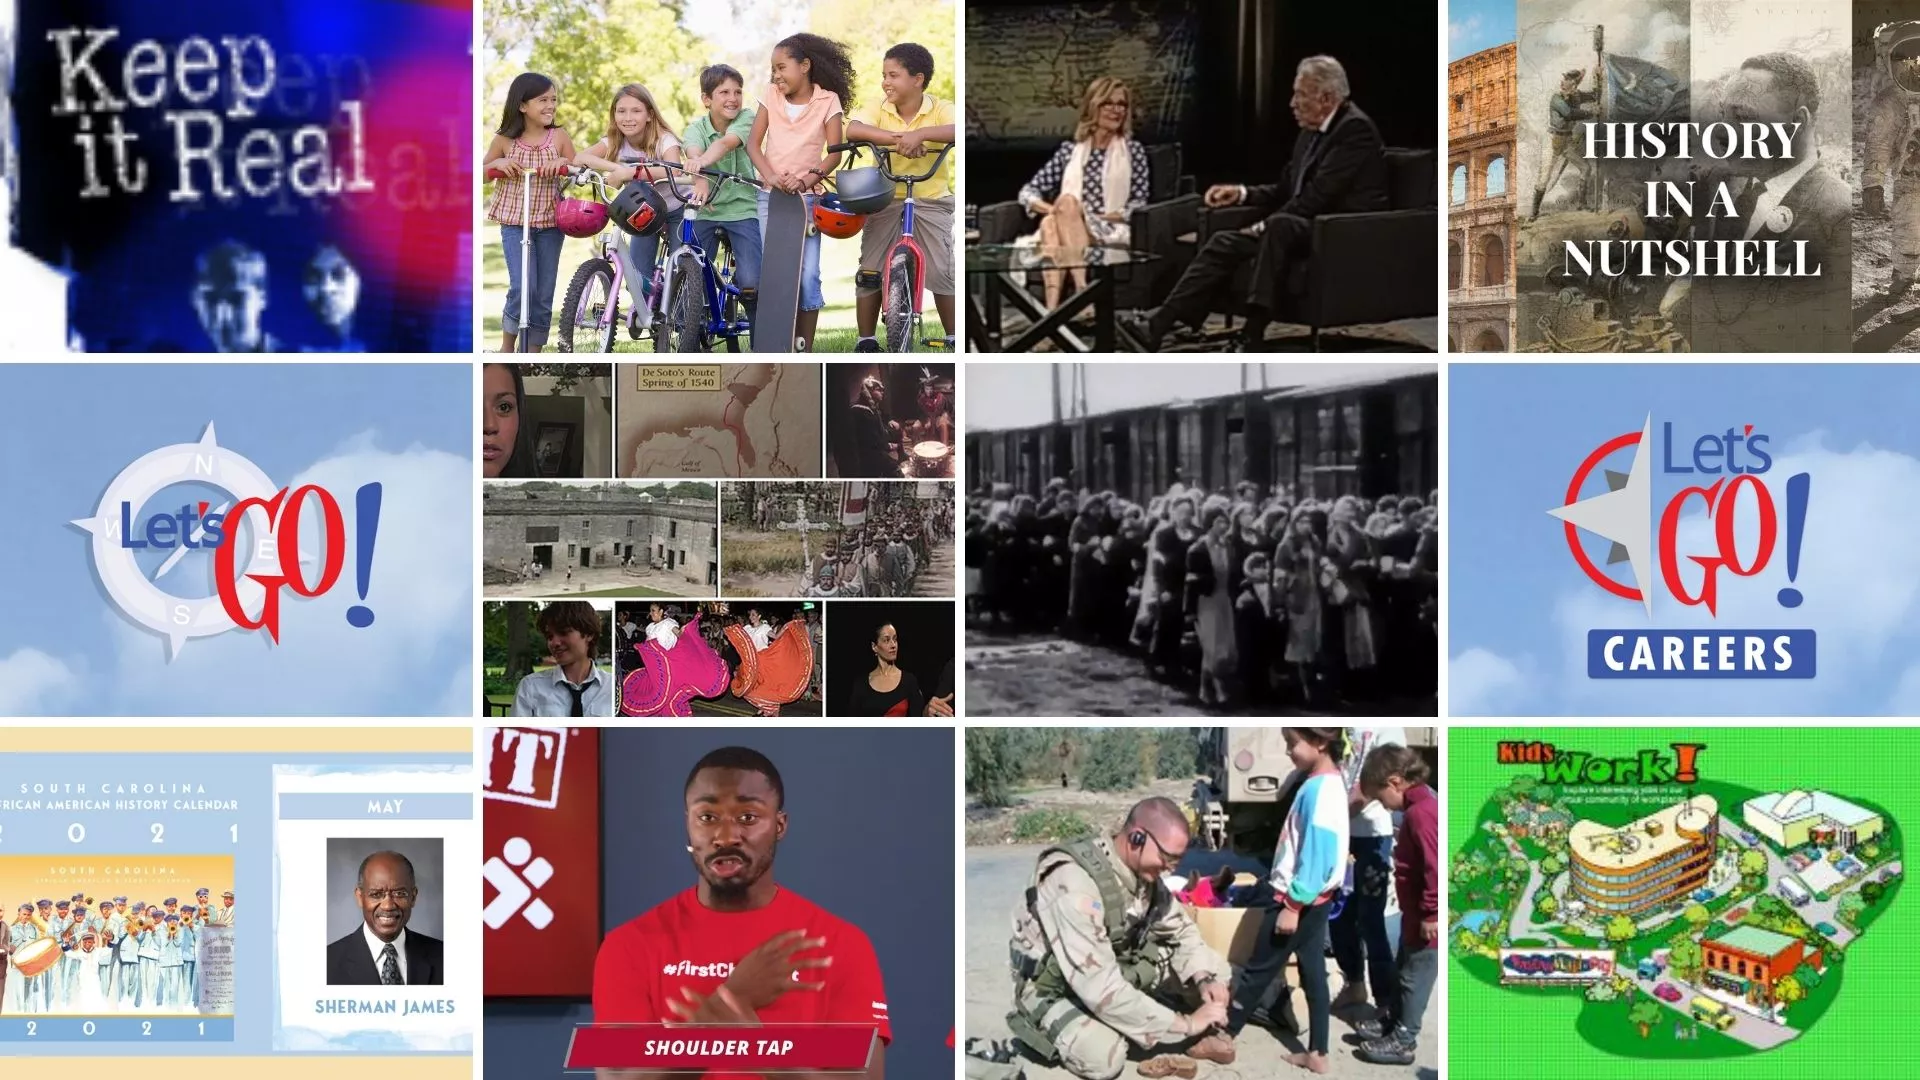 Images from content featured in May 2021 on KnowItAll.org